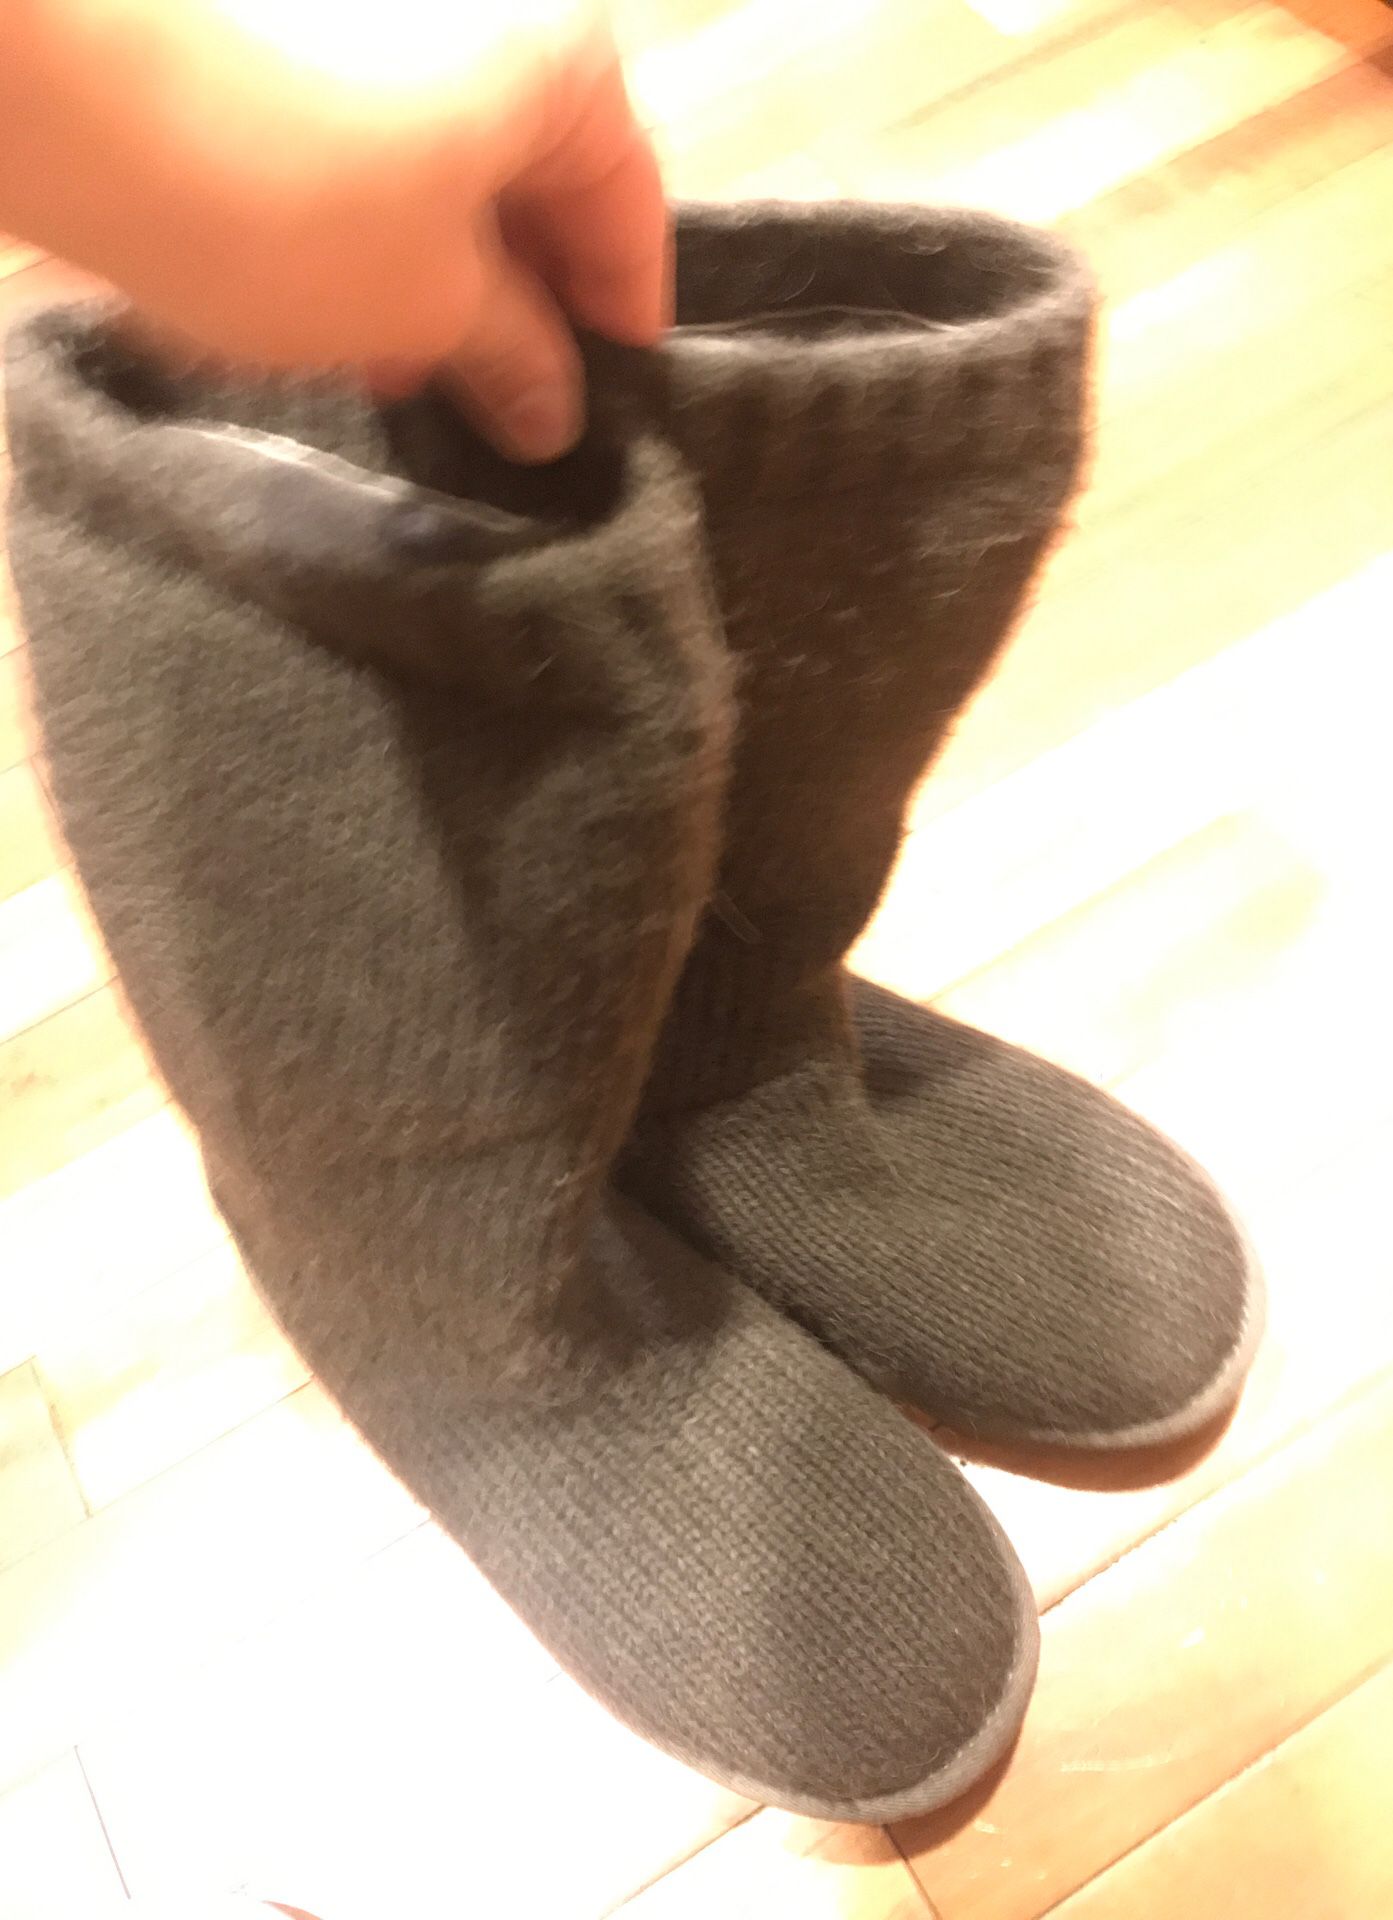 Ugg women’s grey sweater boots. Reinforced heel. Size 7 women’s. Worn about 5 times bc my daughters foot was too wide.